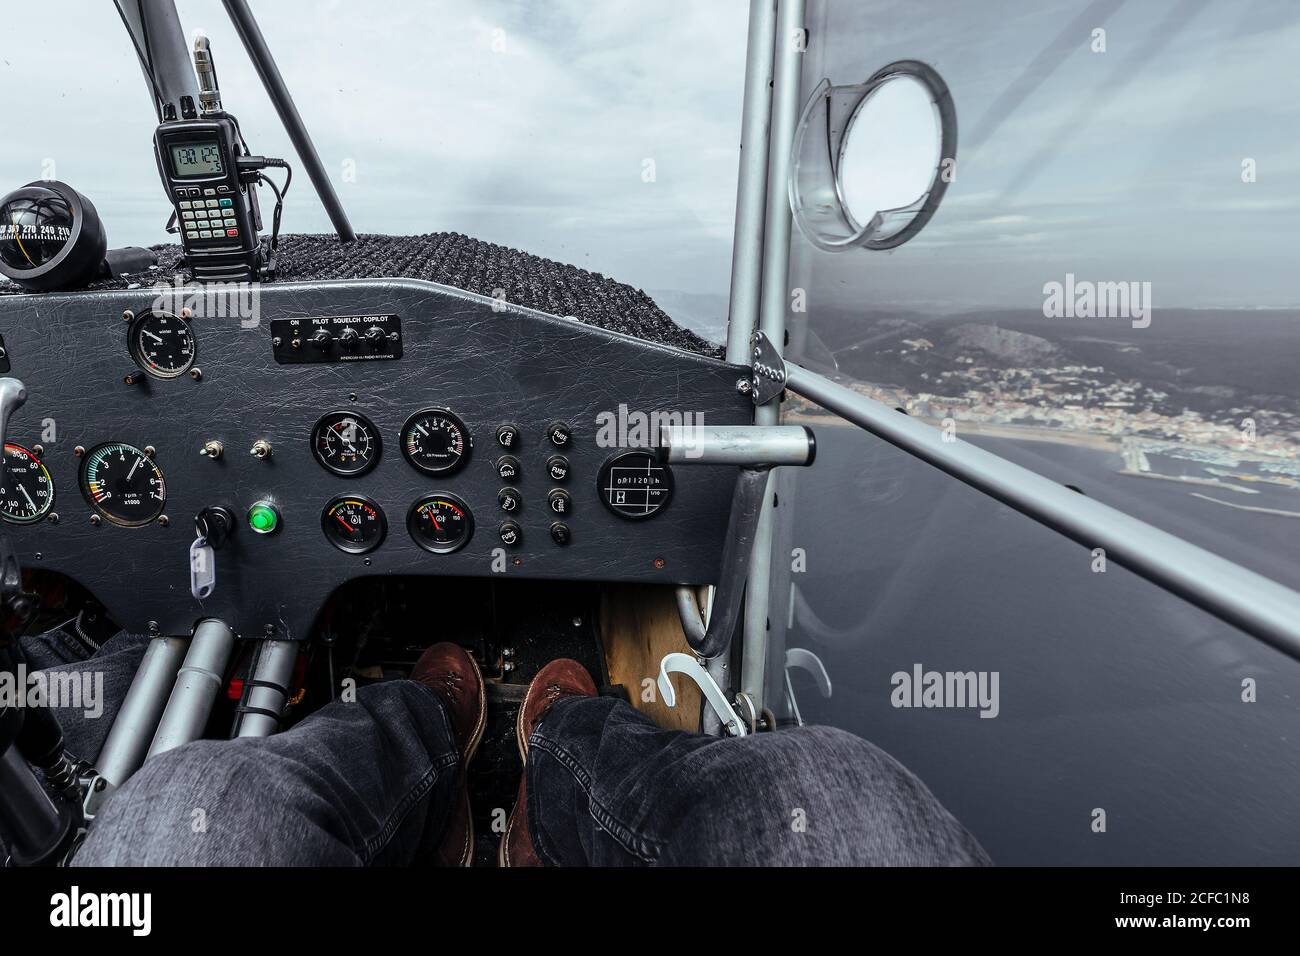 View of an instrument panel inside a cabin of a small plane Stock Photo